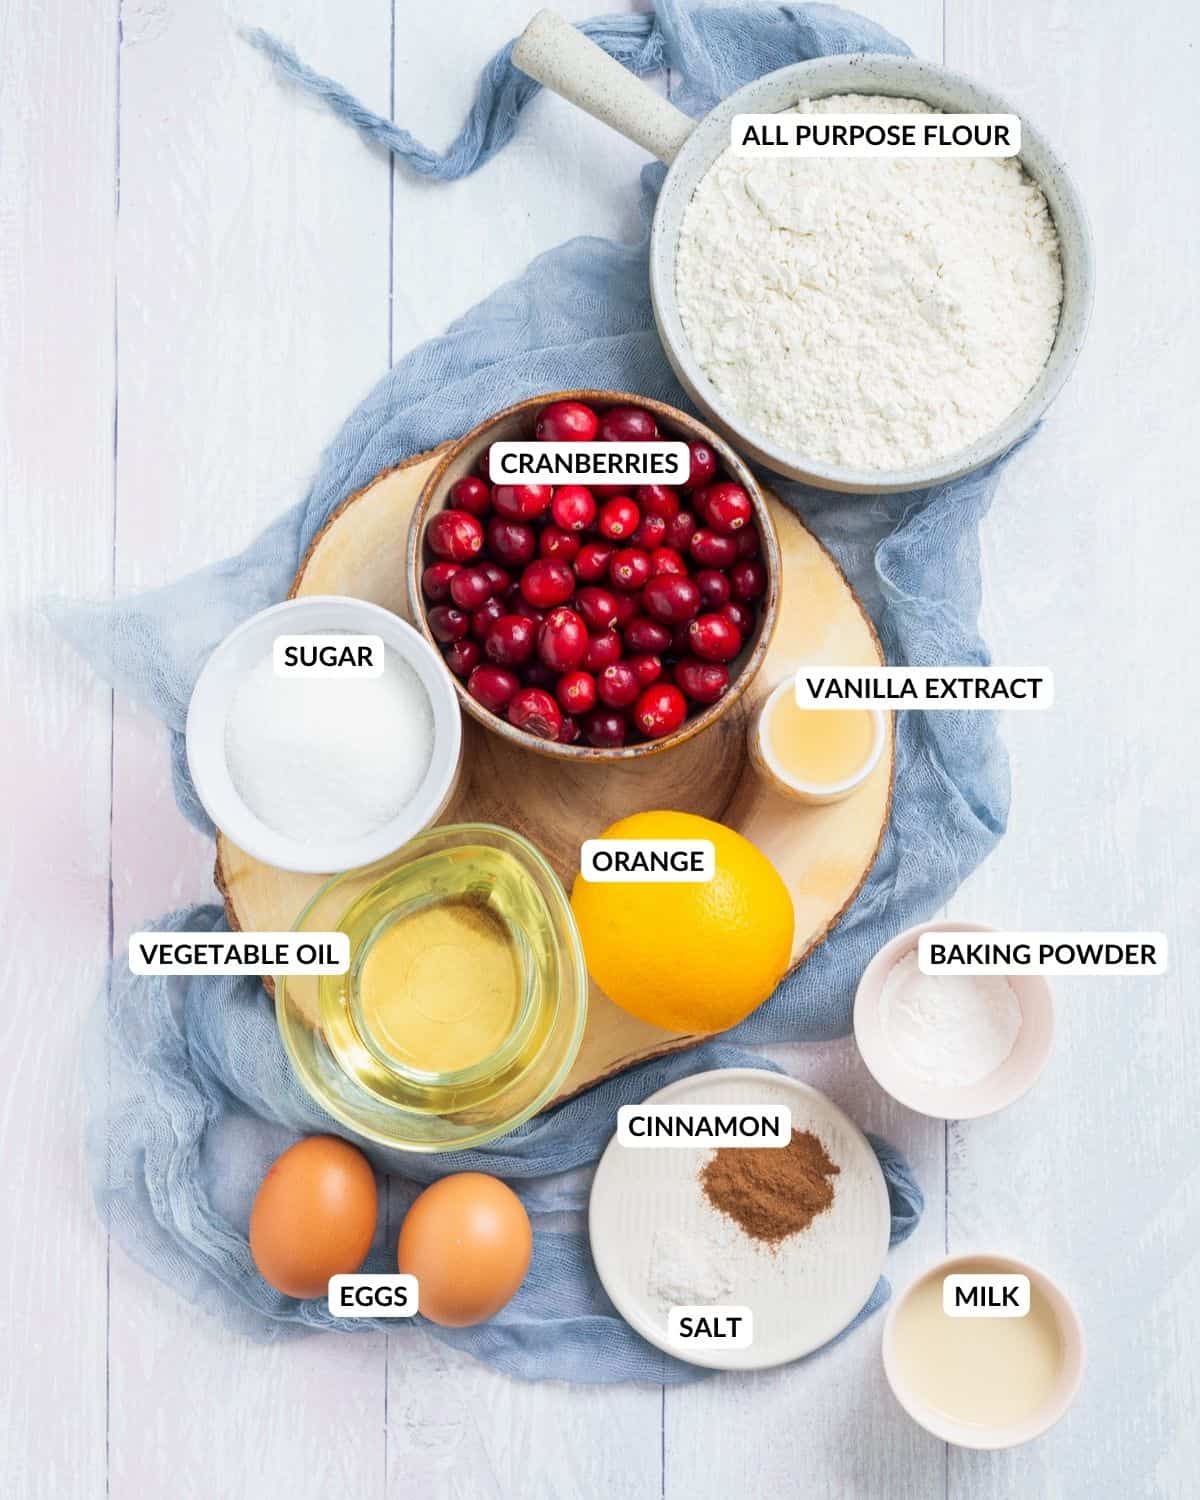 An overhead image of cranberries, flour, baking powder, eggs, vanilla extract, an orange, milk, sugar, cinnamon, and salt in separate containers and a label for each ingredient.